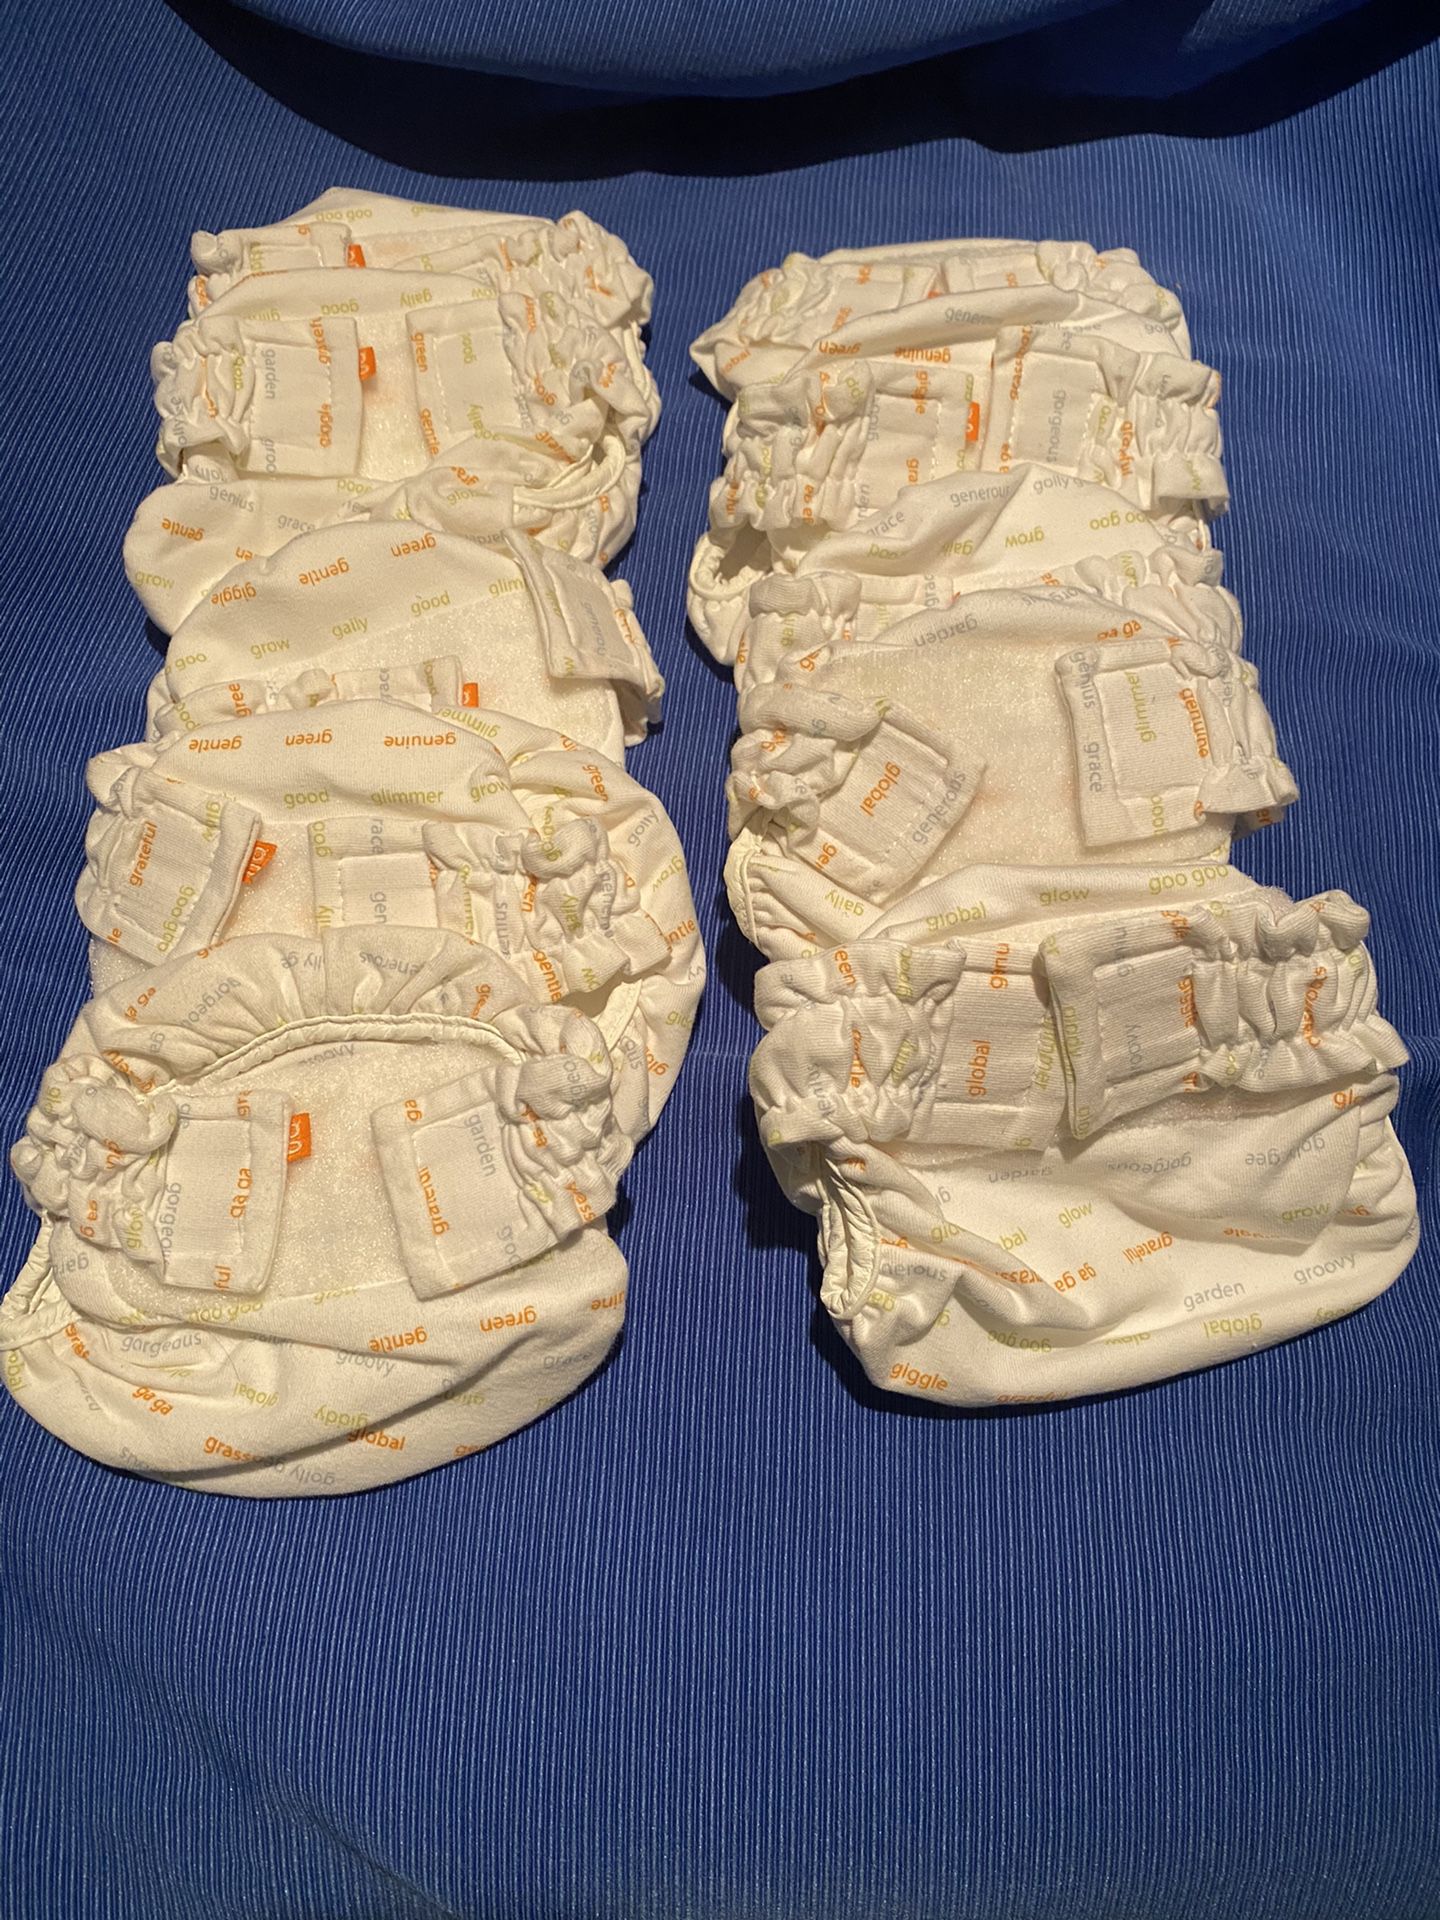 Cloth diapers NEW without packaging